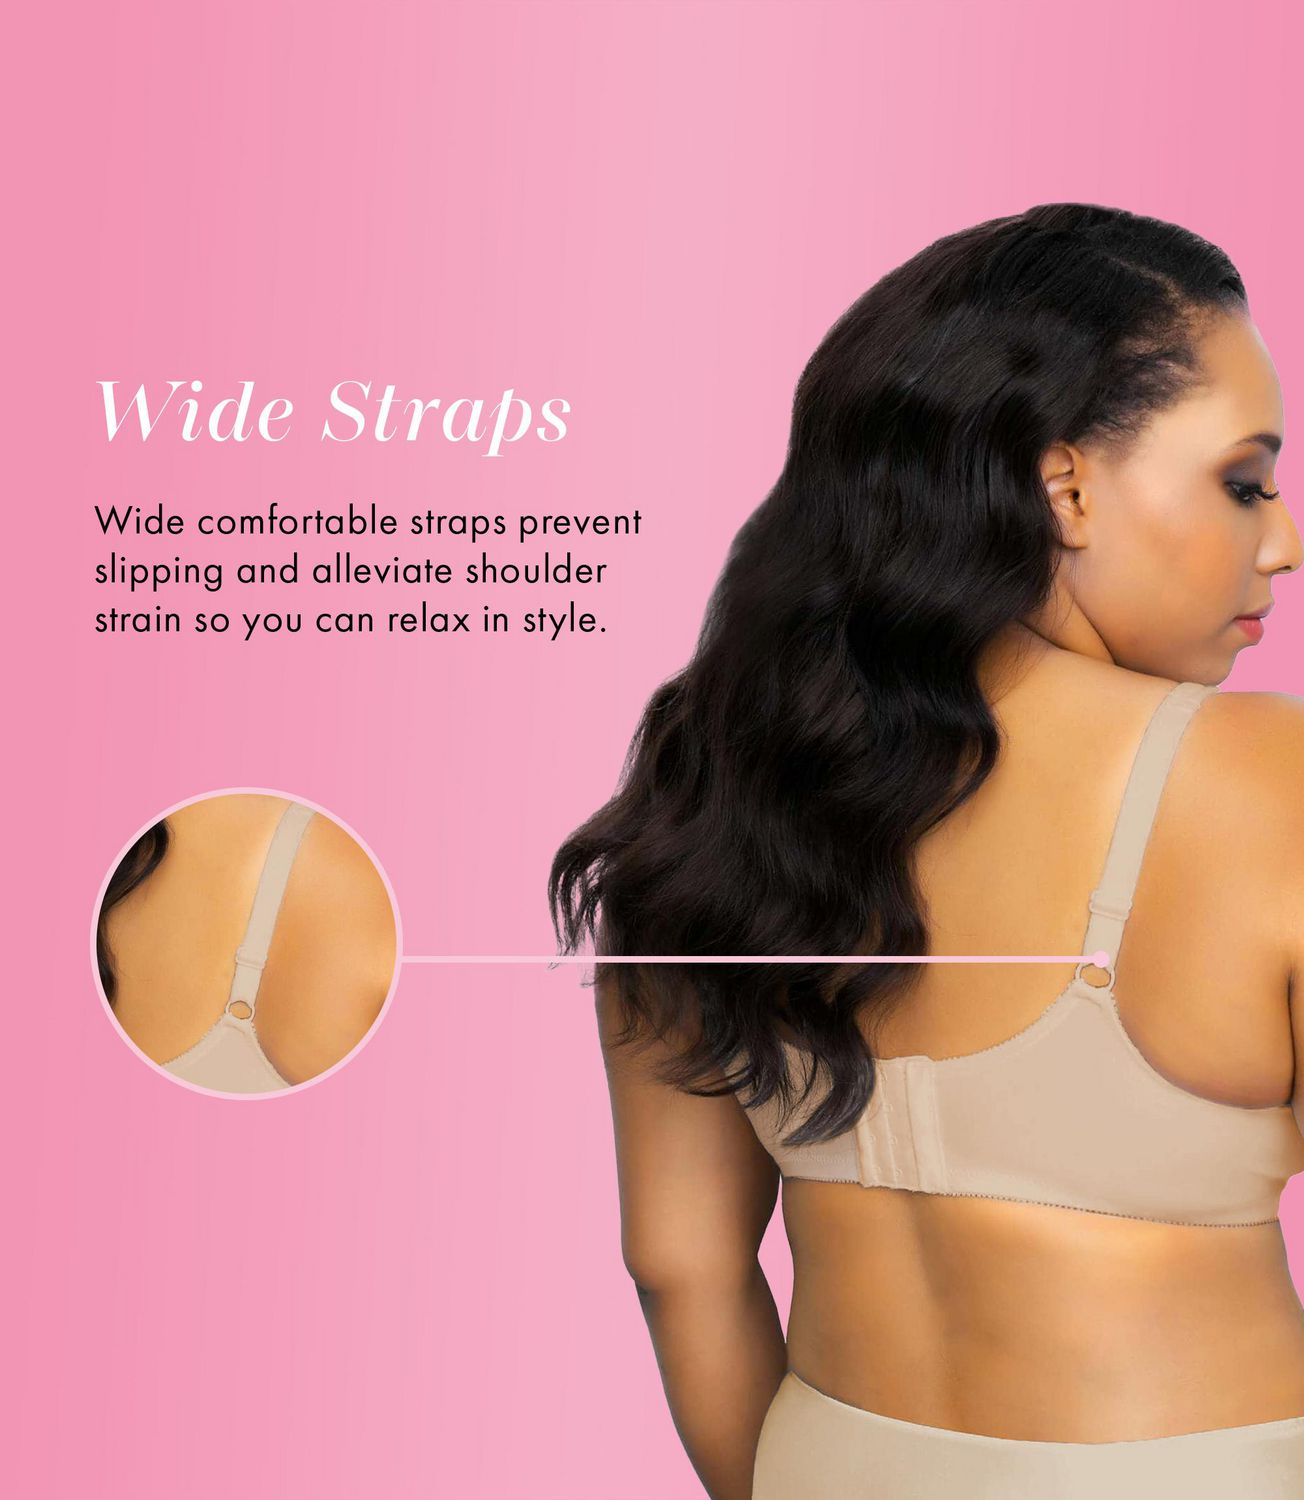 FULL COVERAGE B OR C CUP COTTON BRA